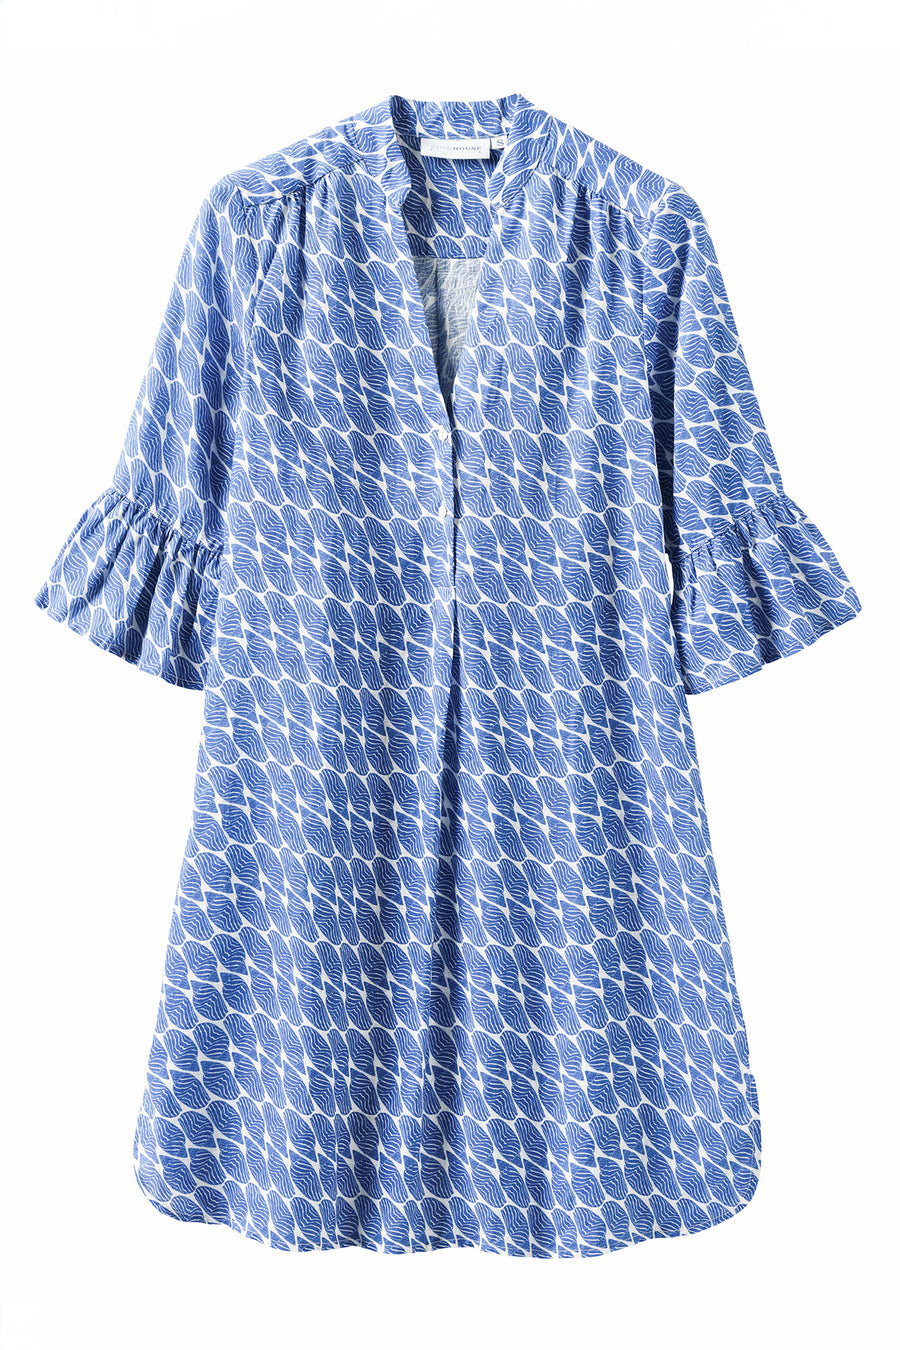 Holiday life Women's linen beach dress with gathered sleeves in navy blue Striped Shell print